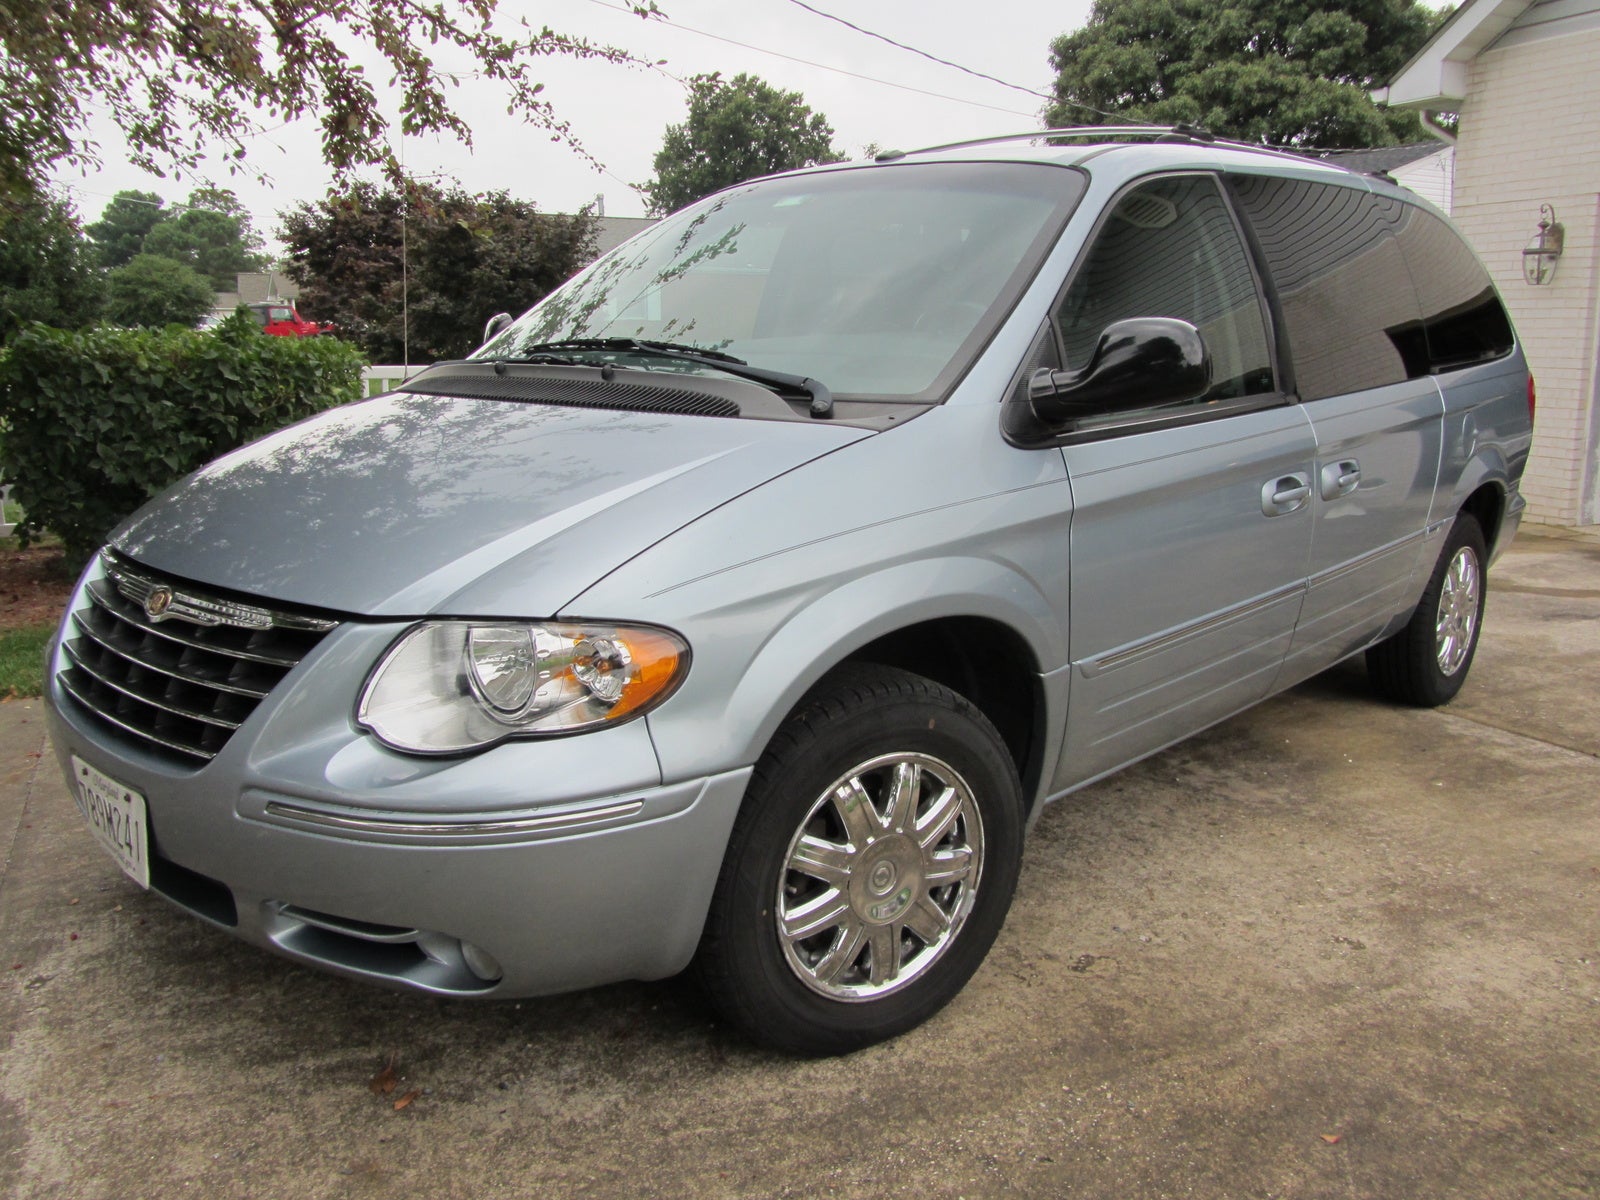 2006 Chrysler Town & Country - Pictures - CarGurus 2006 Chrysler Town & Country Tire Size P215/65r16 Limited Touring